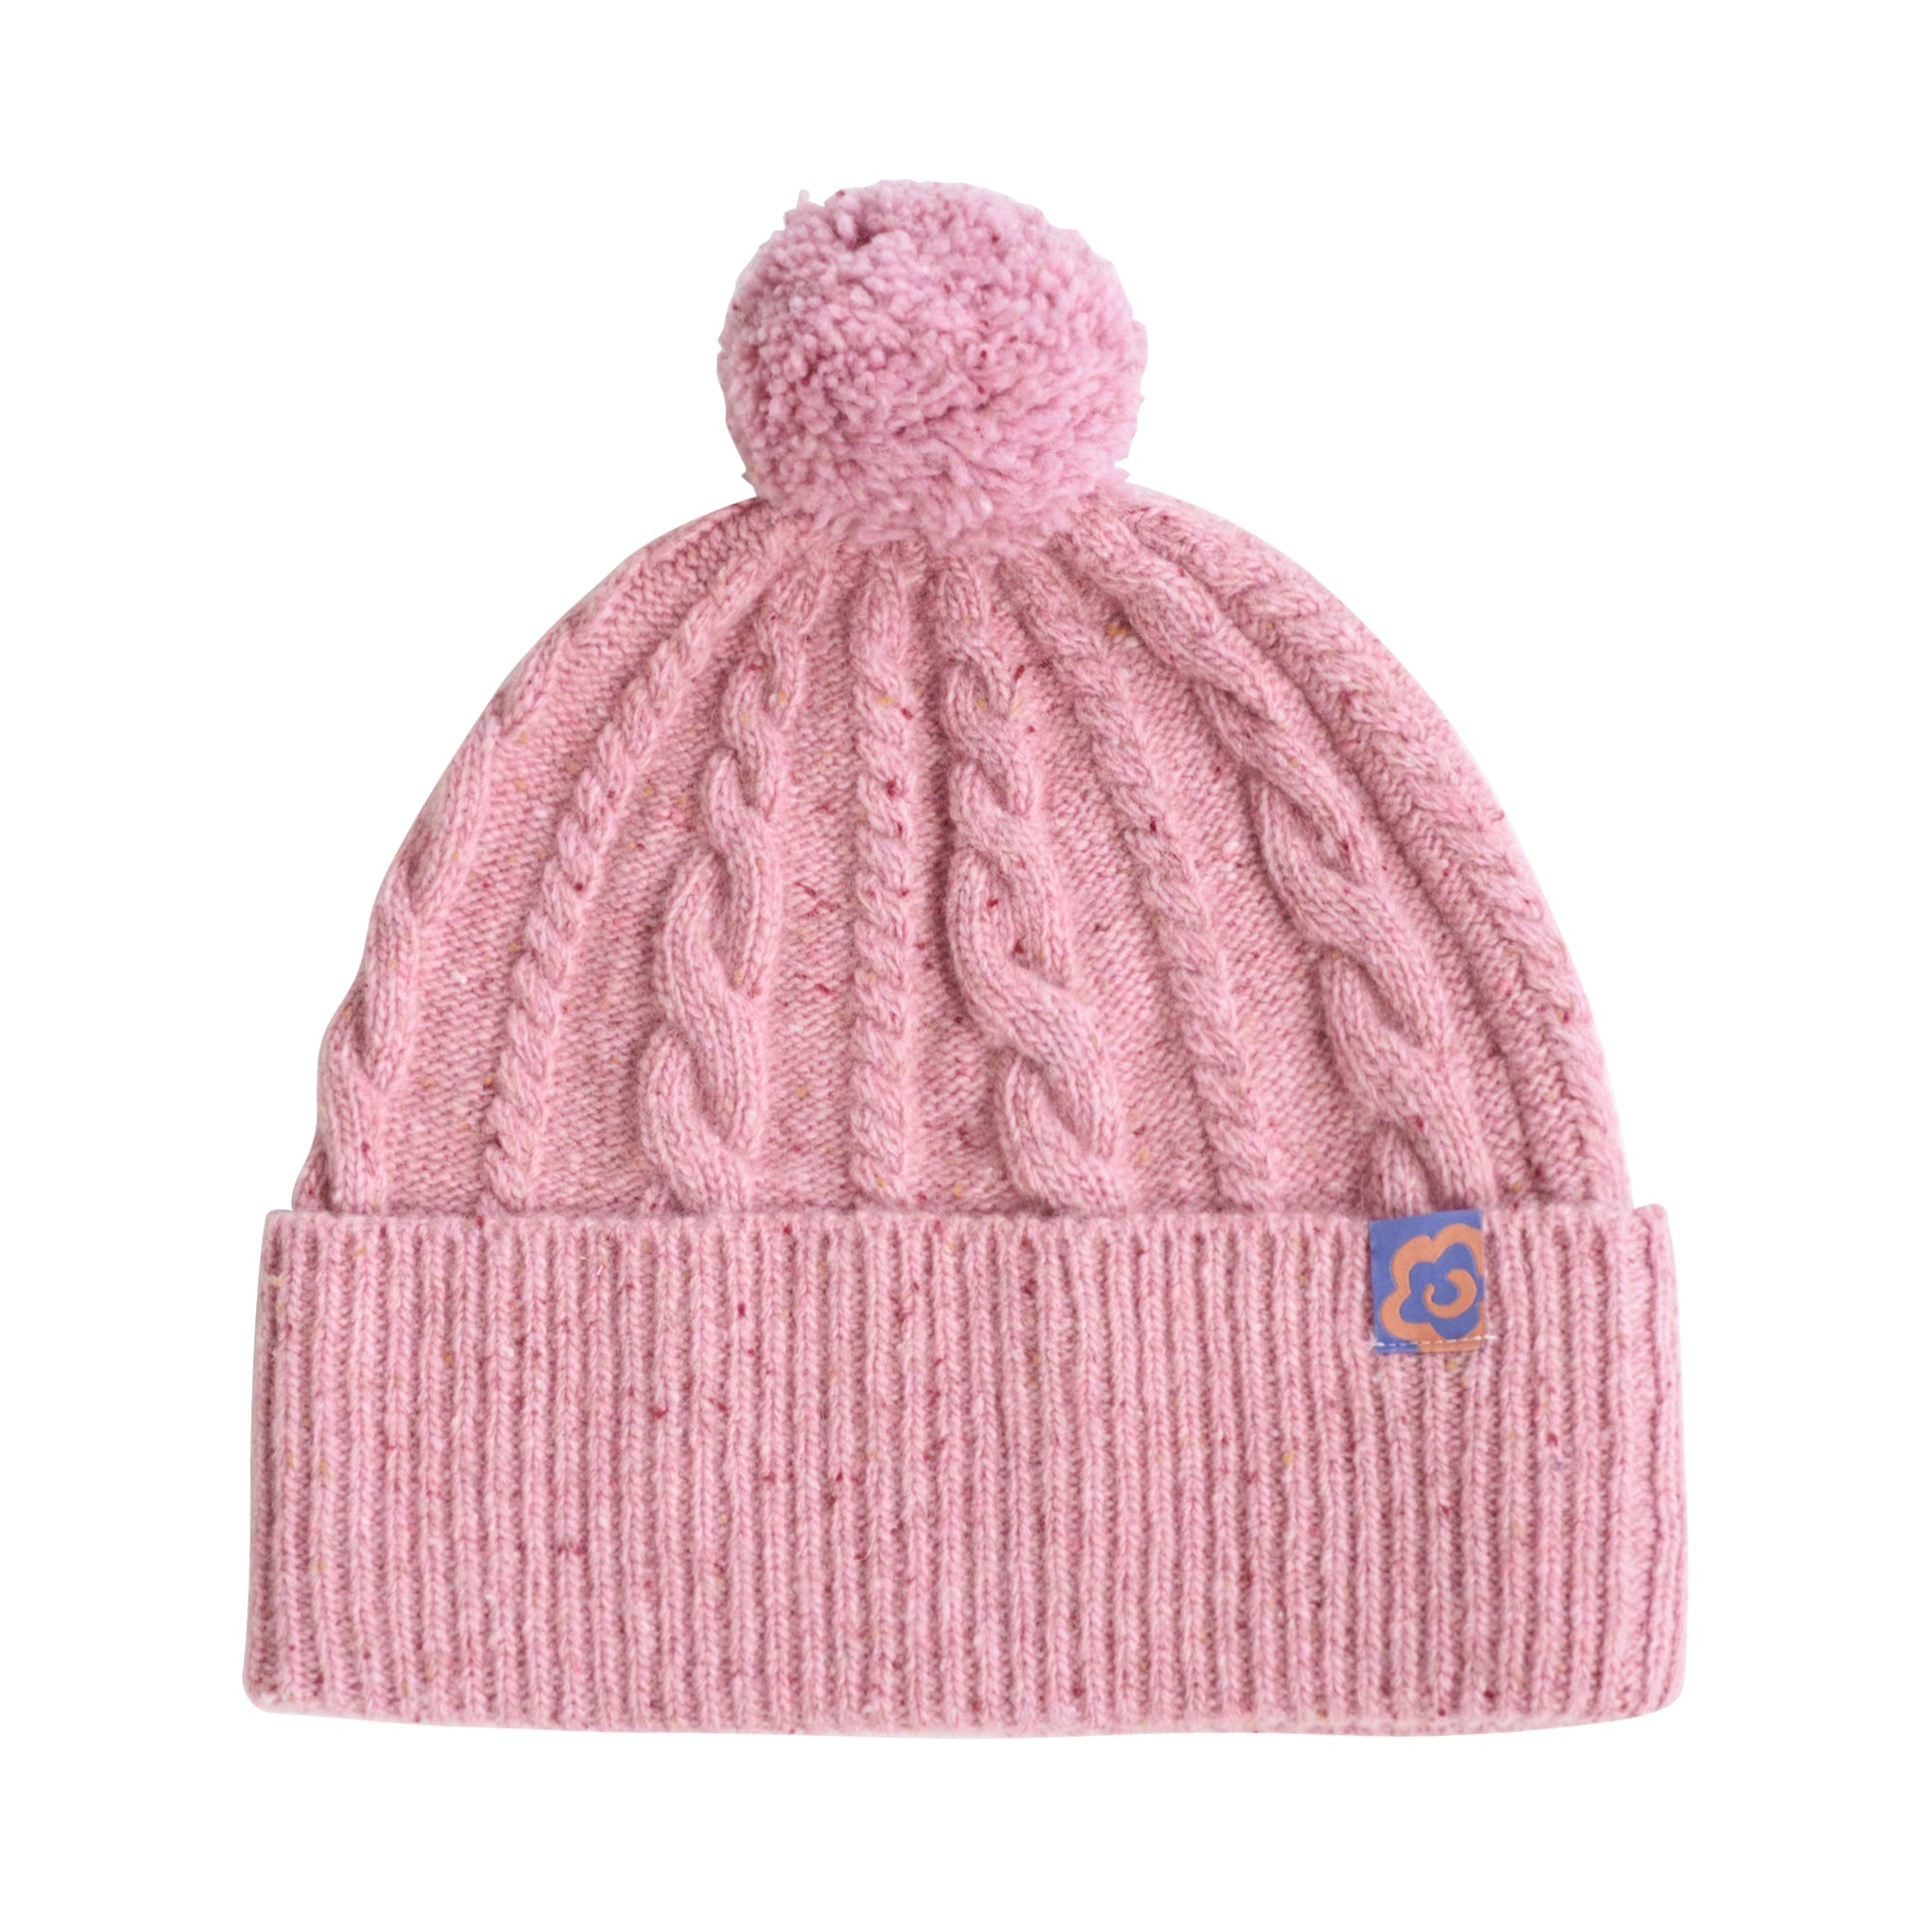 "Pom Pom" Cable Knit Wool Beanie Hat - Pink Blush product